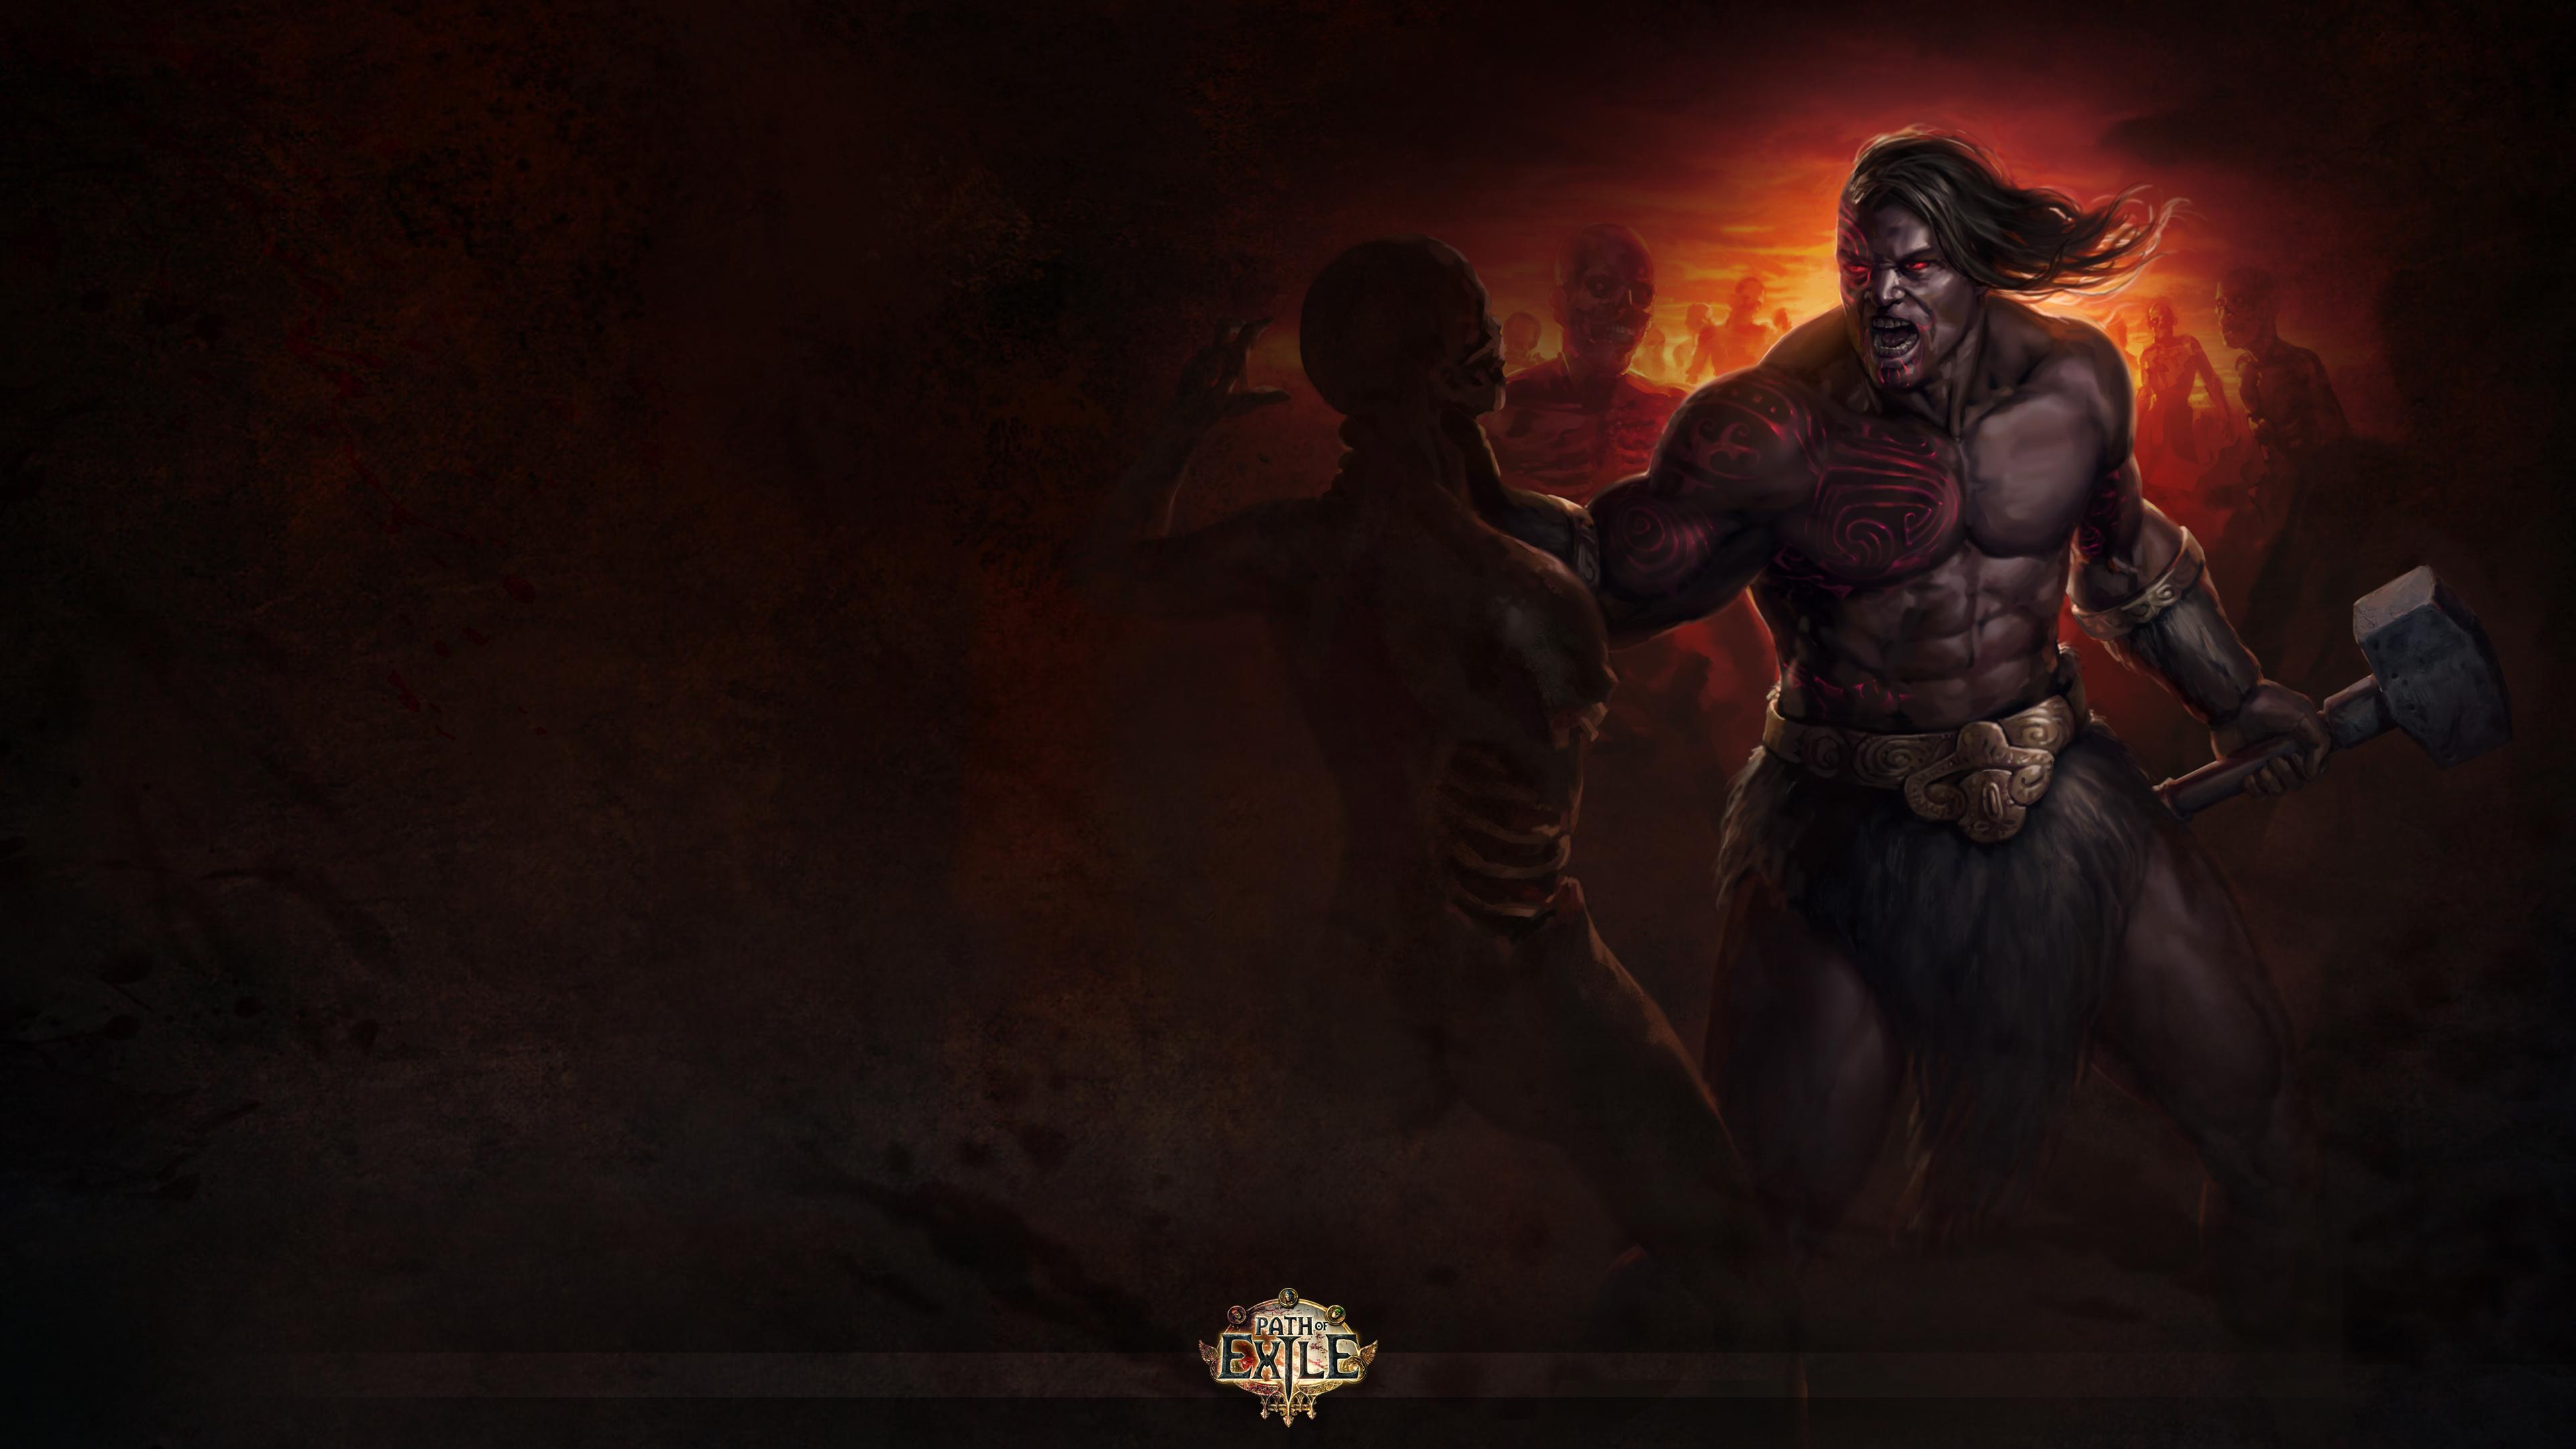 Forum Path of Exile Wallpaper!